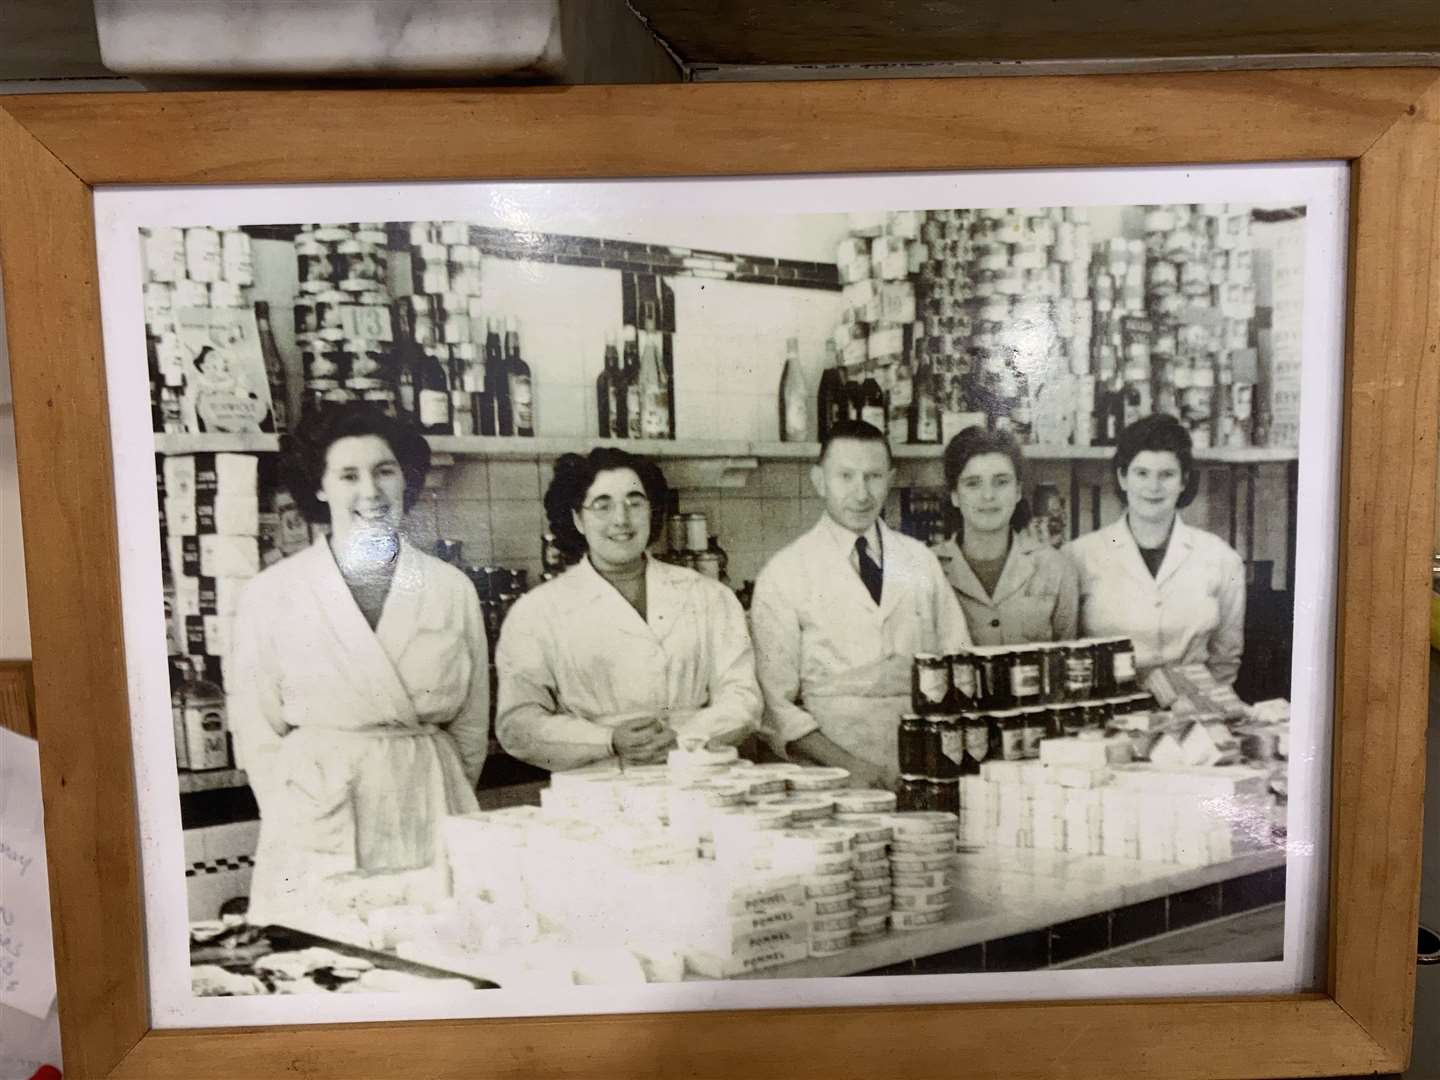 Staff at the shop in 1948